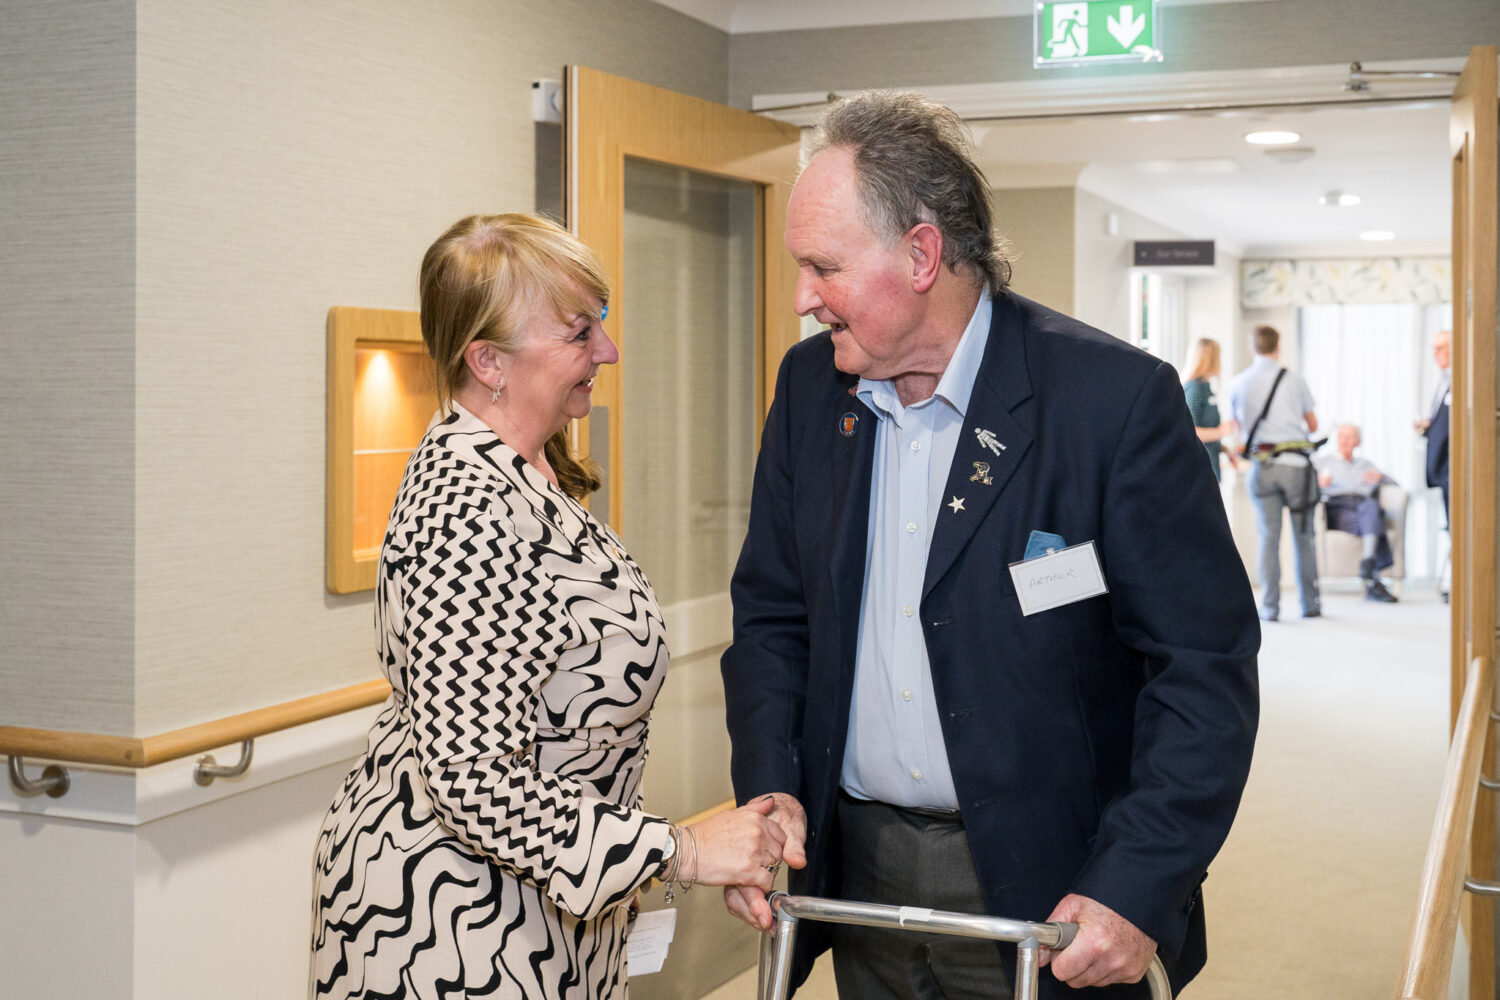 A staff member talks to a resident at the care home opening in Worthing